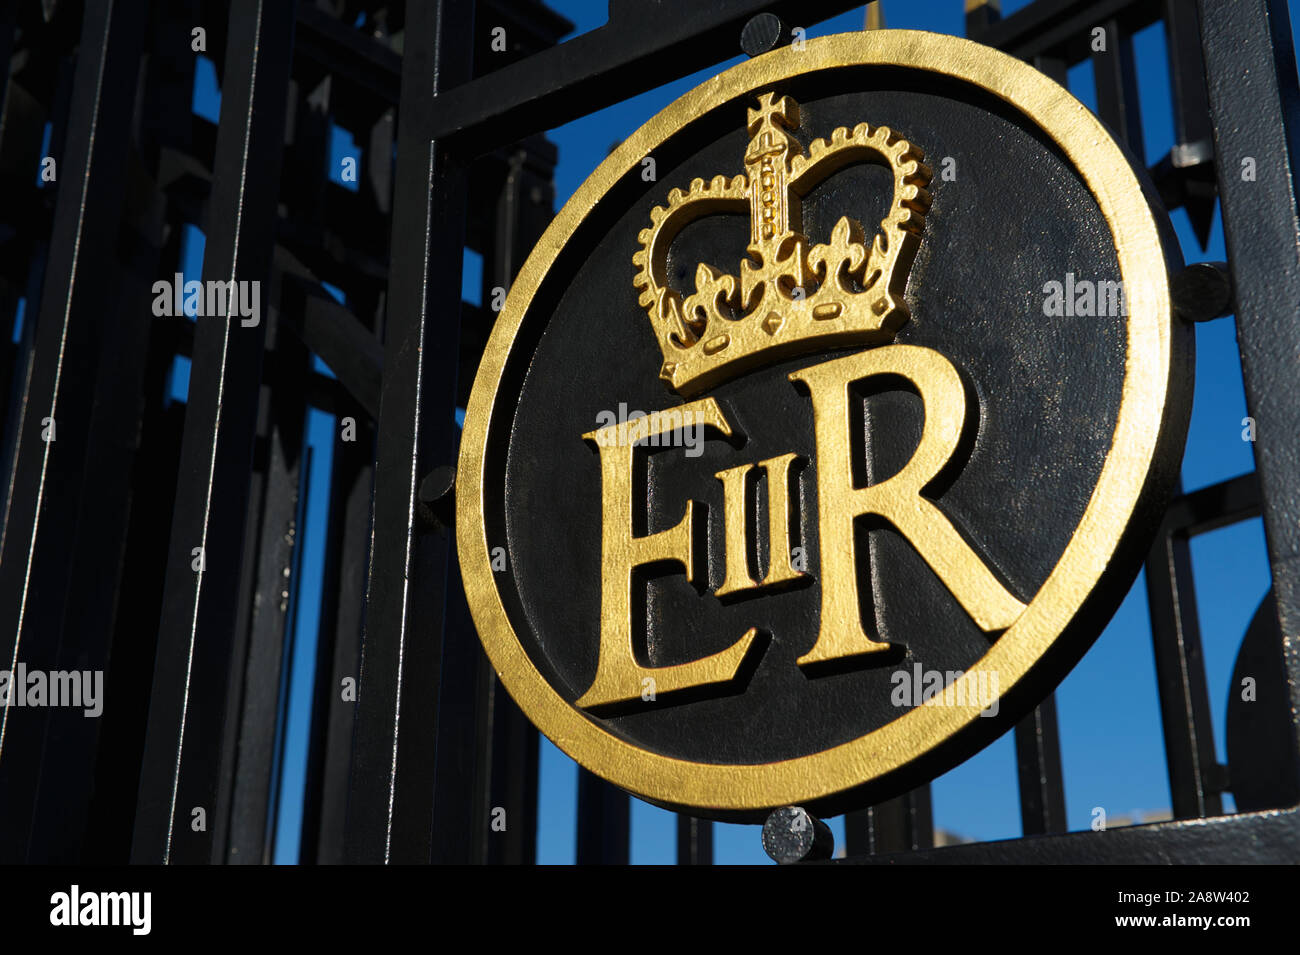 Queen Elizabeth Regina sovereign's cypher symbol with crown in gold on black iron gate, a monogram displayed on official apparatus Stock Photo